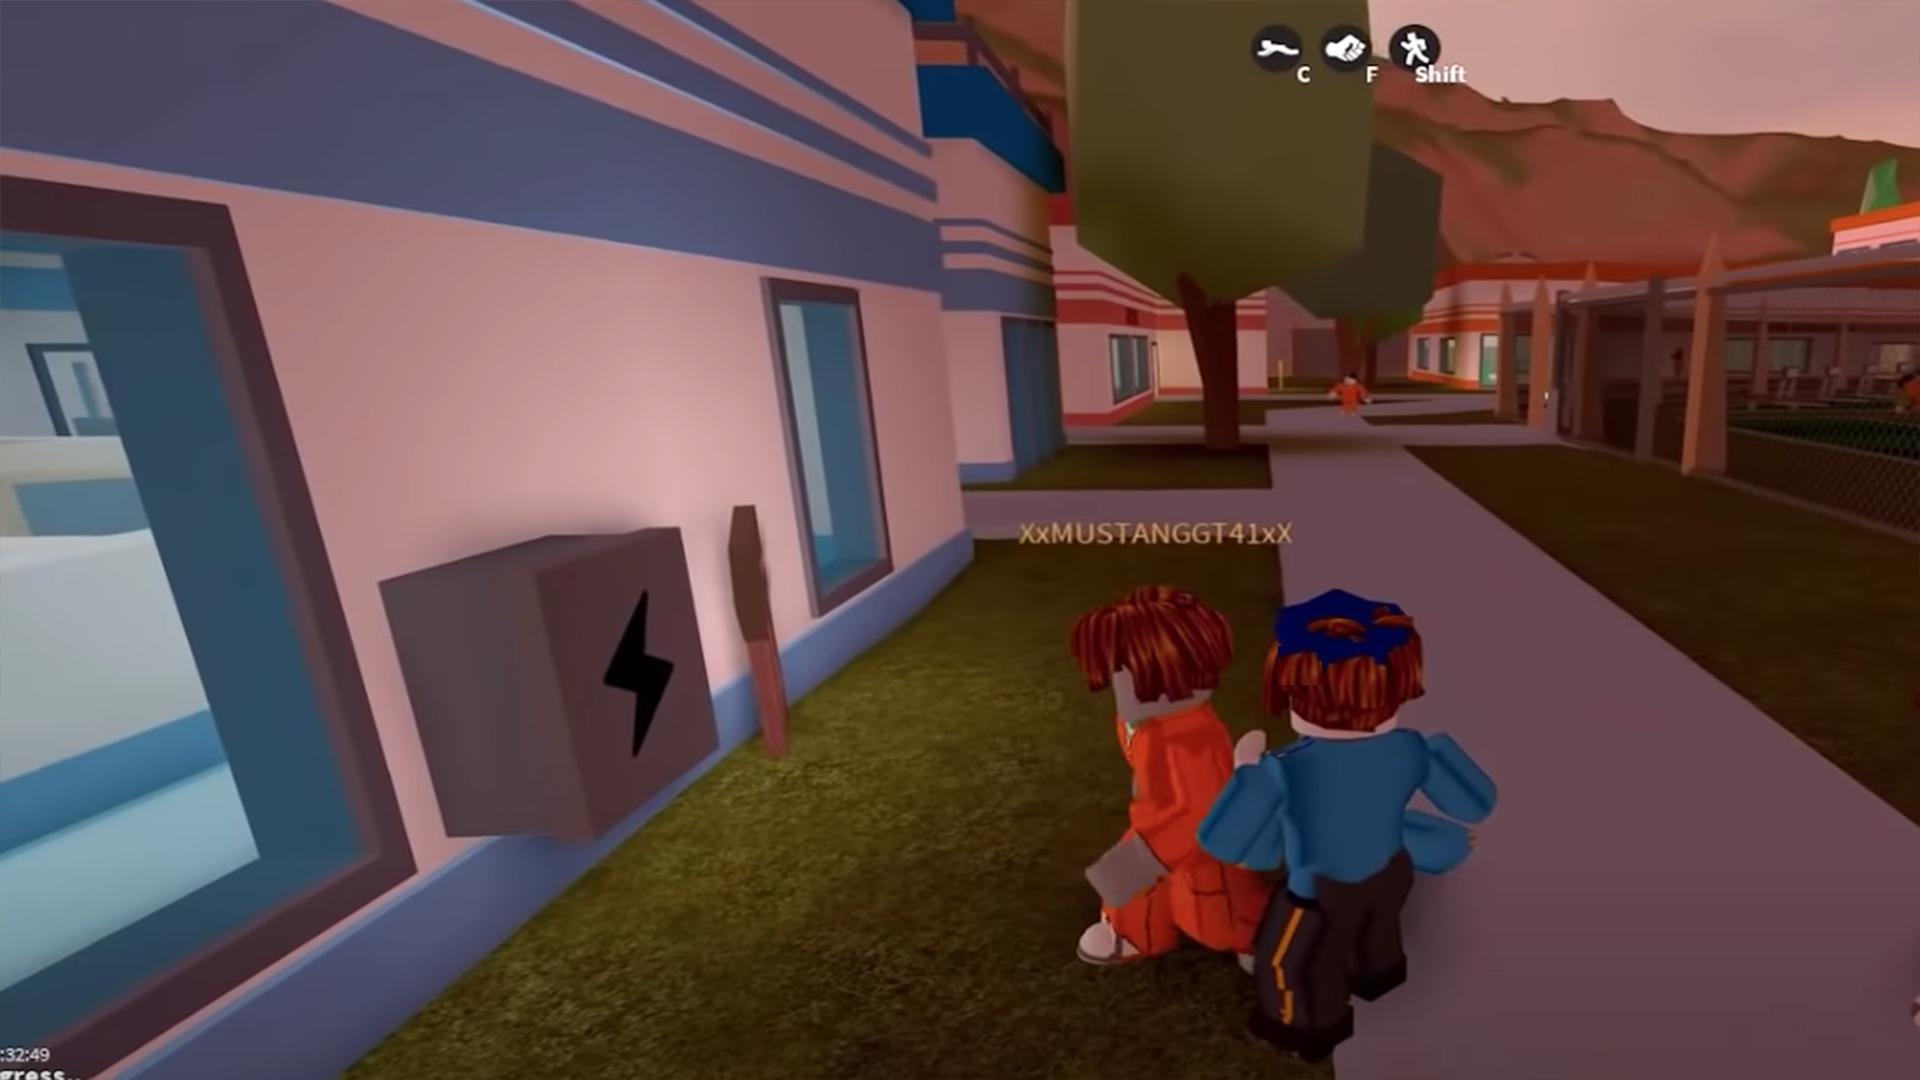 New Jailbreak Obby Escape Jail Break Survival For Android Apk Download - roblox escape jail obby 2